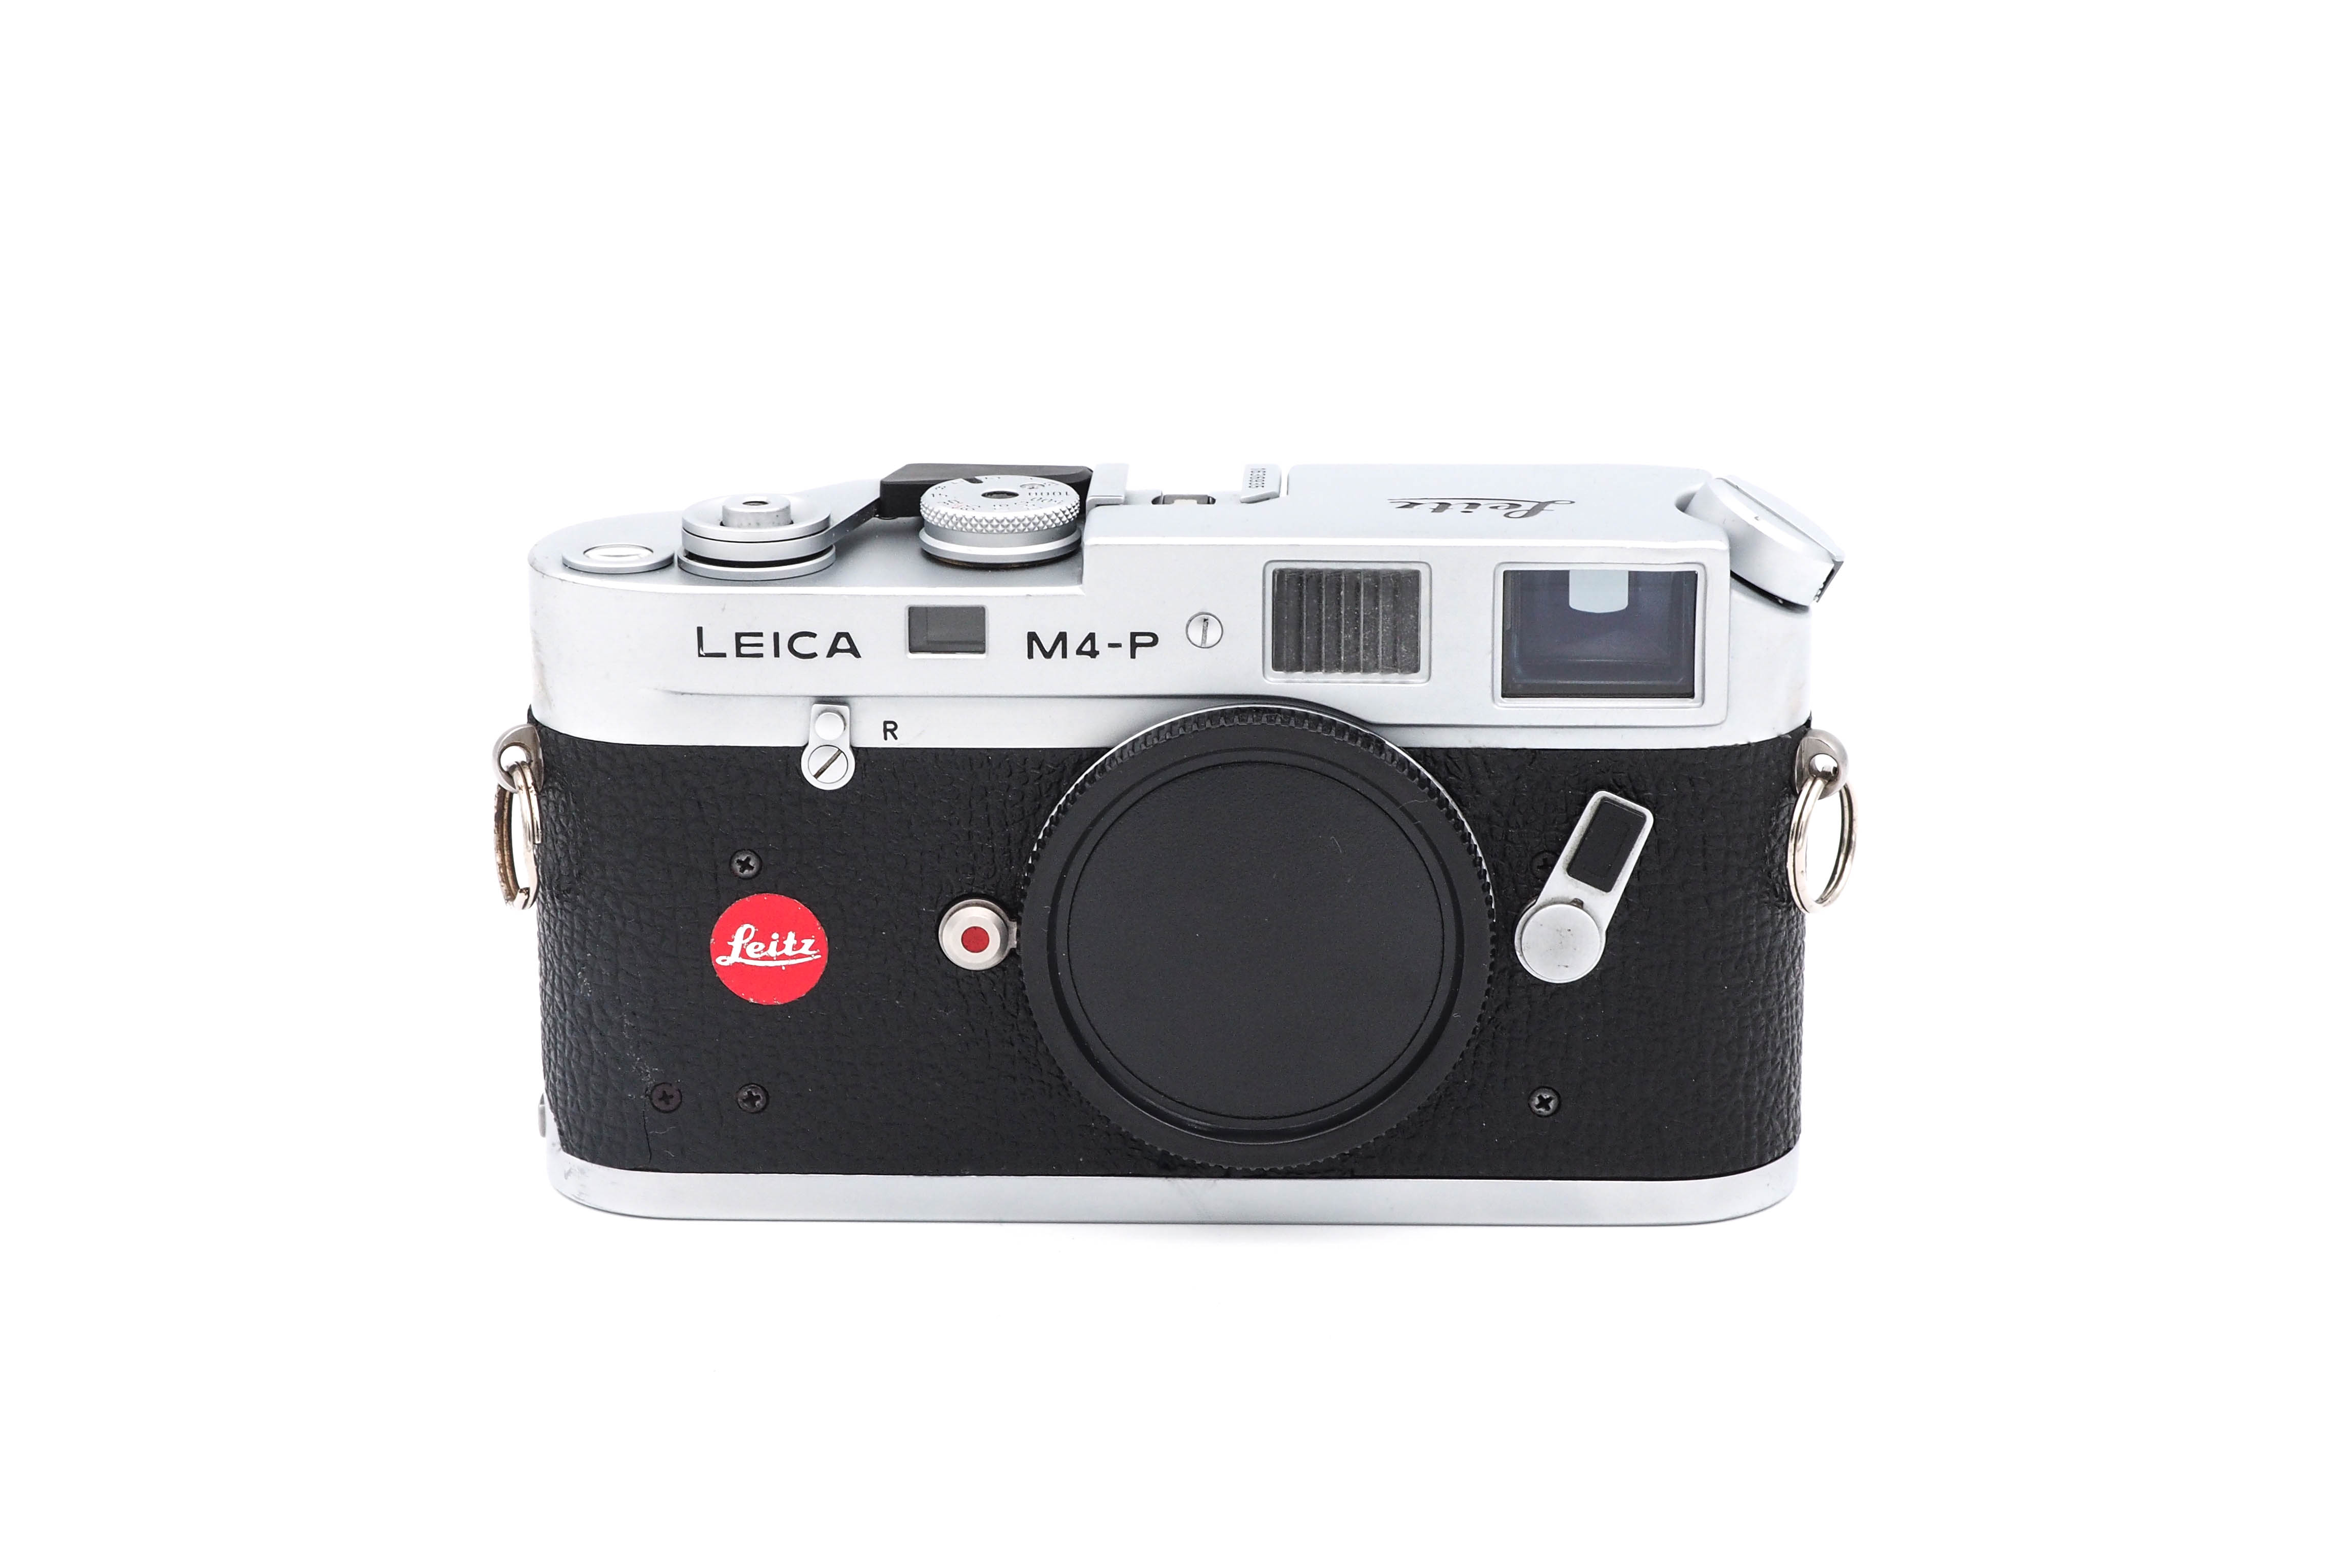 Leica M4-P "70 years" Special Edition